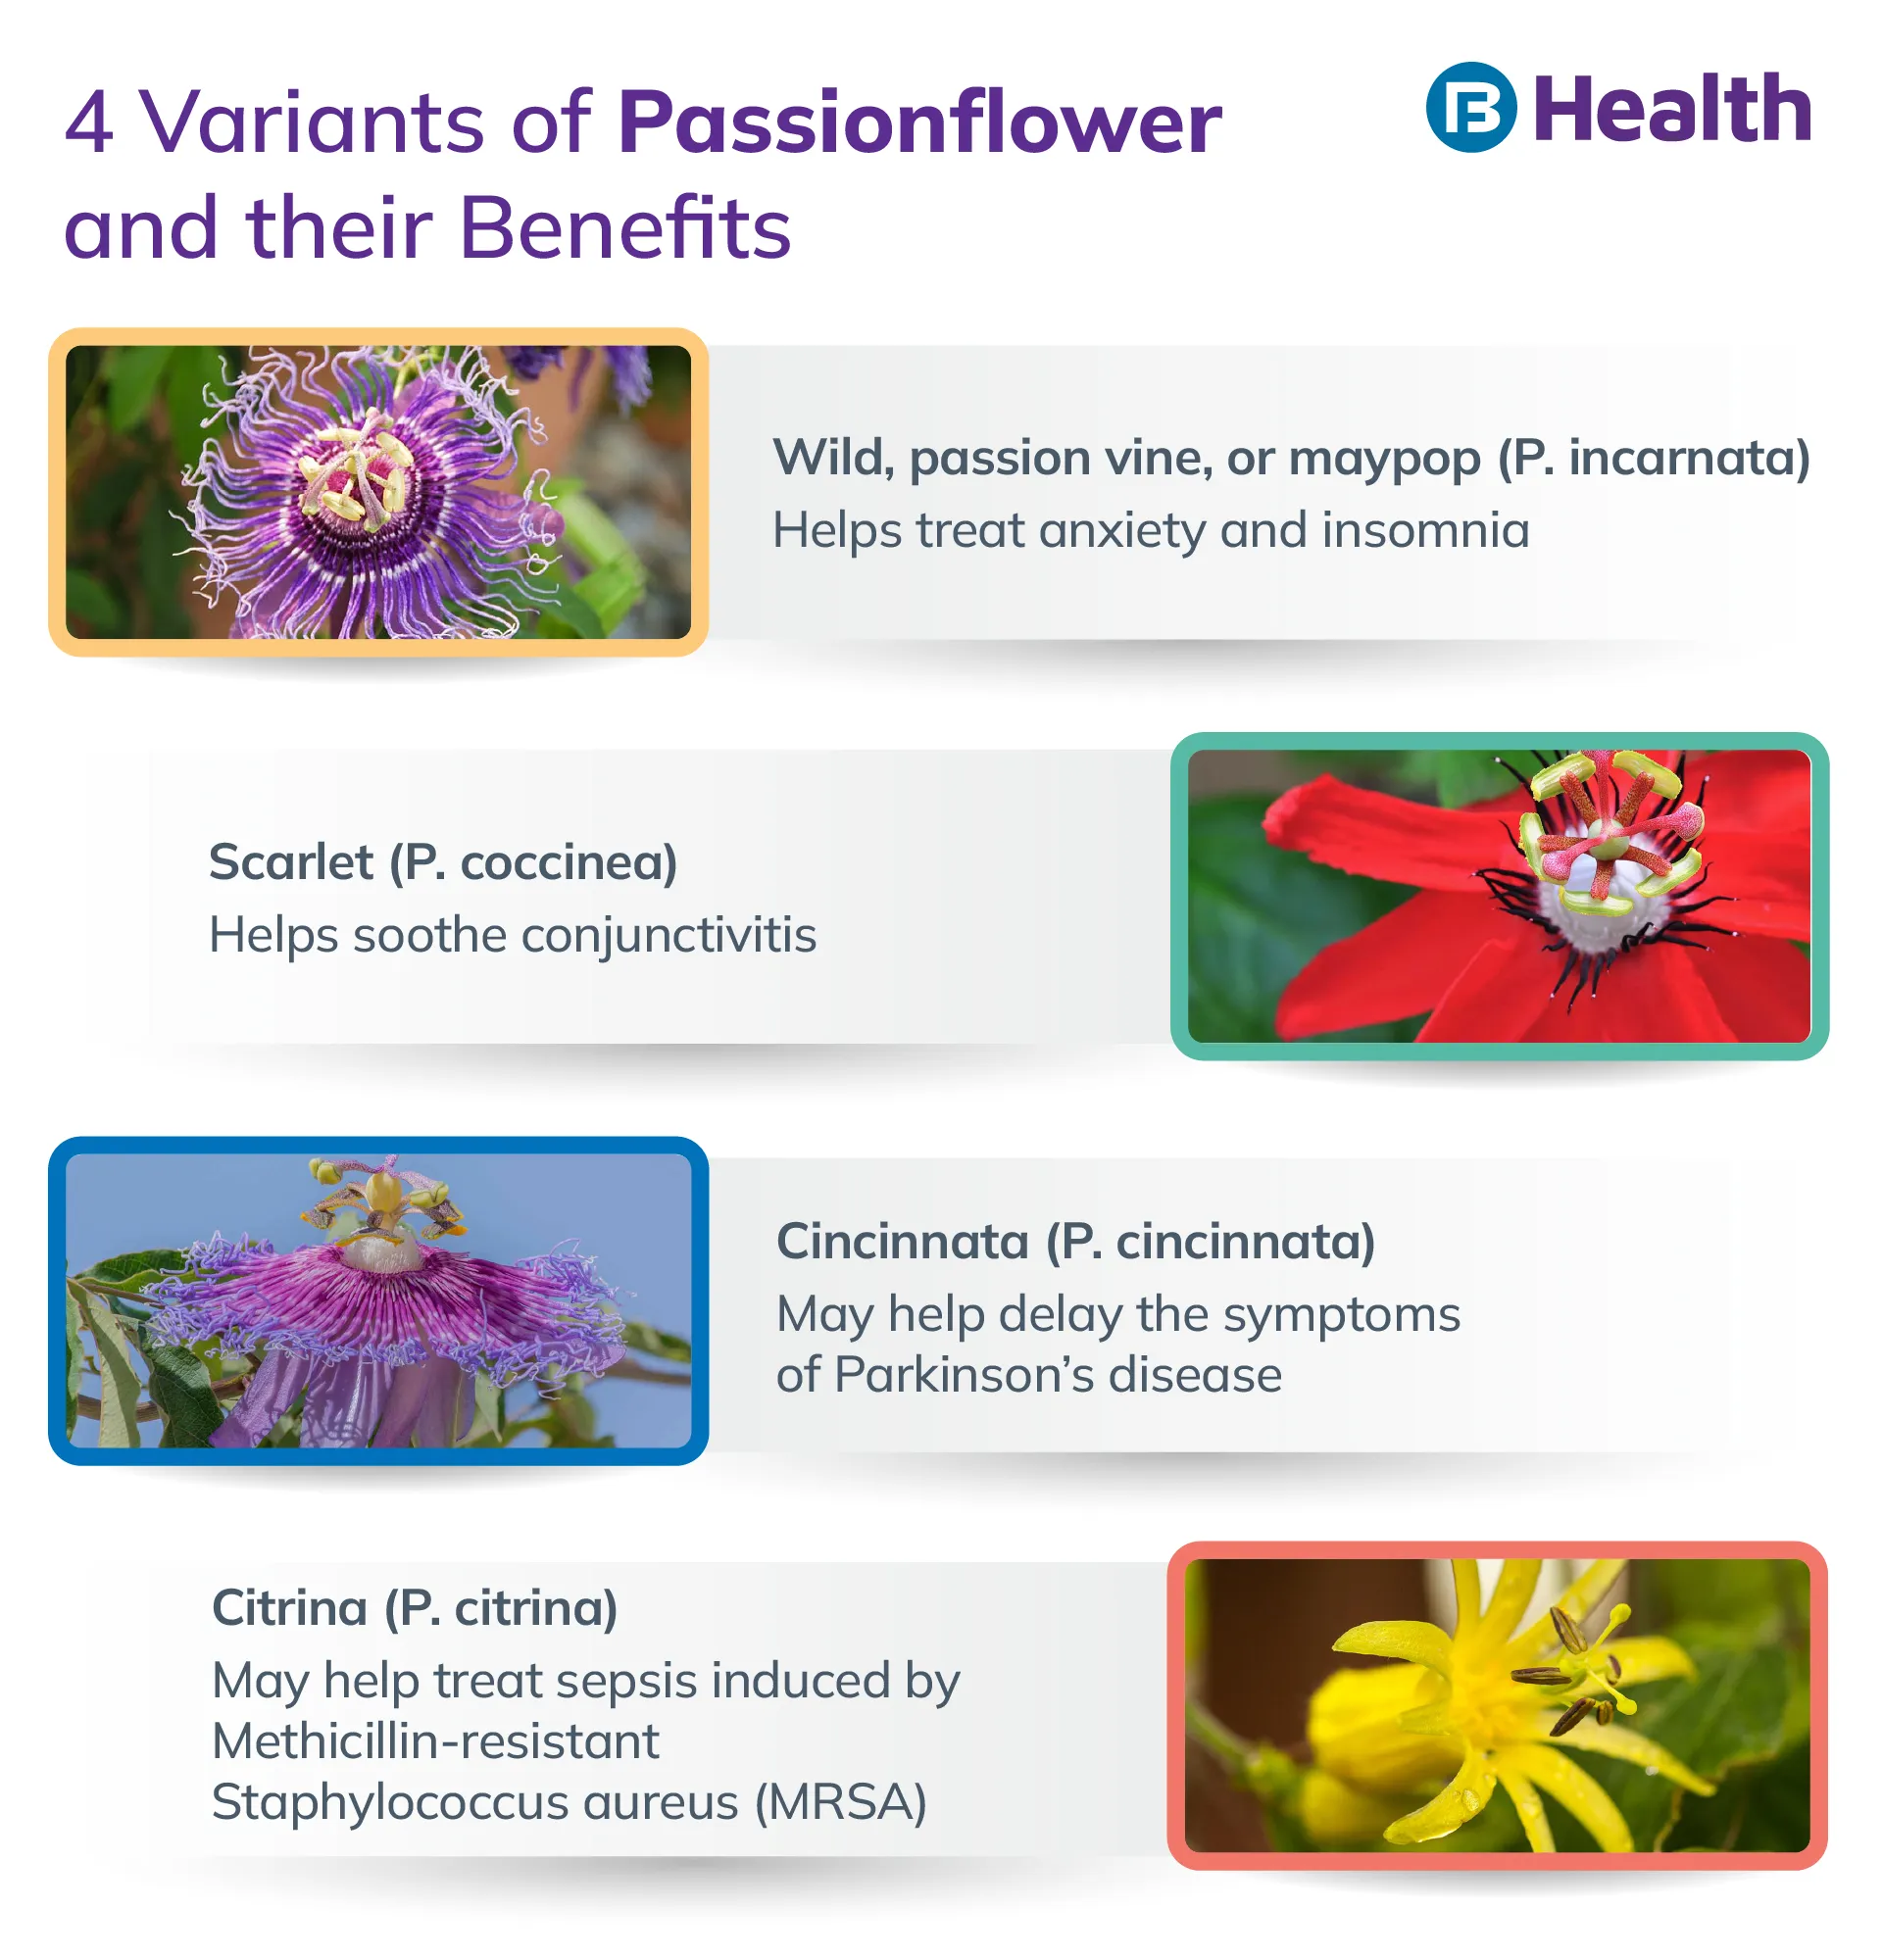 Passionflower variants and their benefits